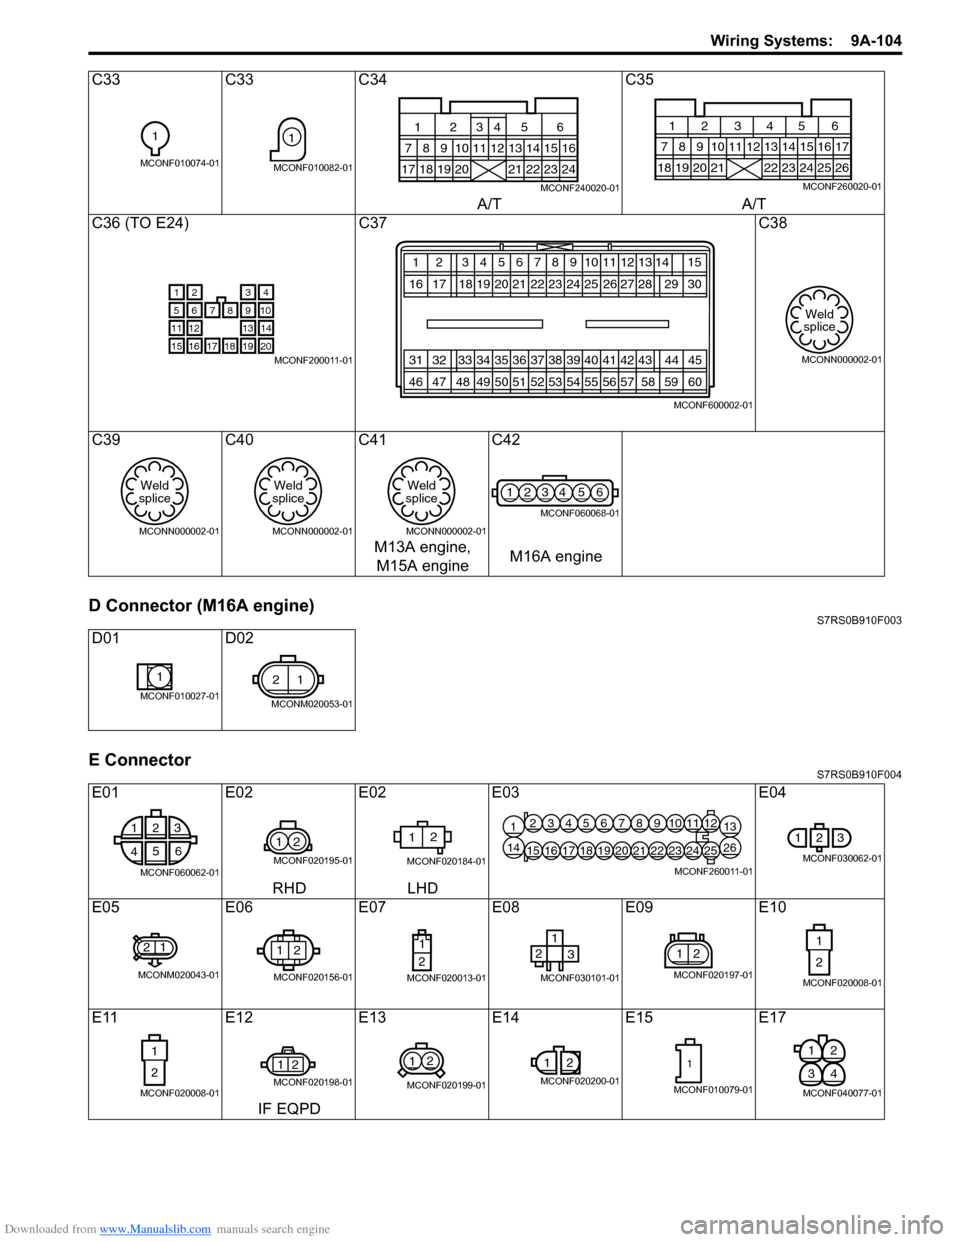 SUZUKI SWIFT 2006 2.G Service Workshop Manual Downloaded from www.Manualslib.com manuals search engine Wiring Systems:  9A-104
D Connector (M16A engine)S7RS0B910F003
E ConnectorS7RS0B910F004
C33C33C34 C35
A/T A/T
C36 (TO E24) C37 C38
C39 C40C41 C